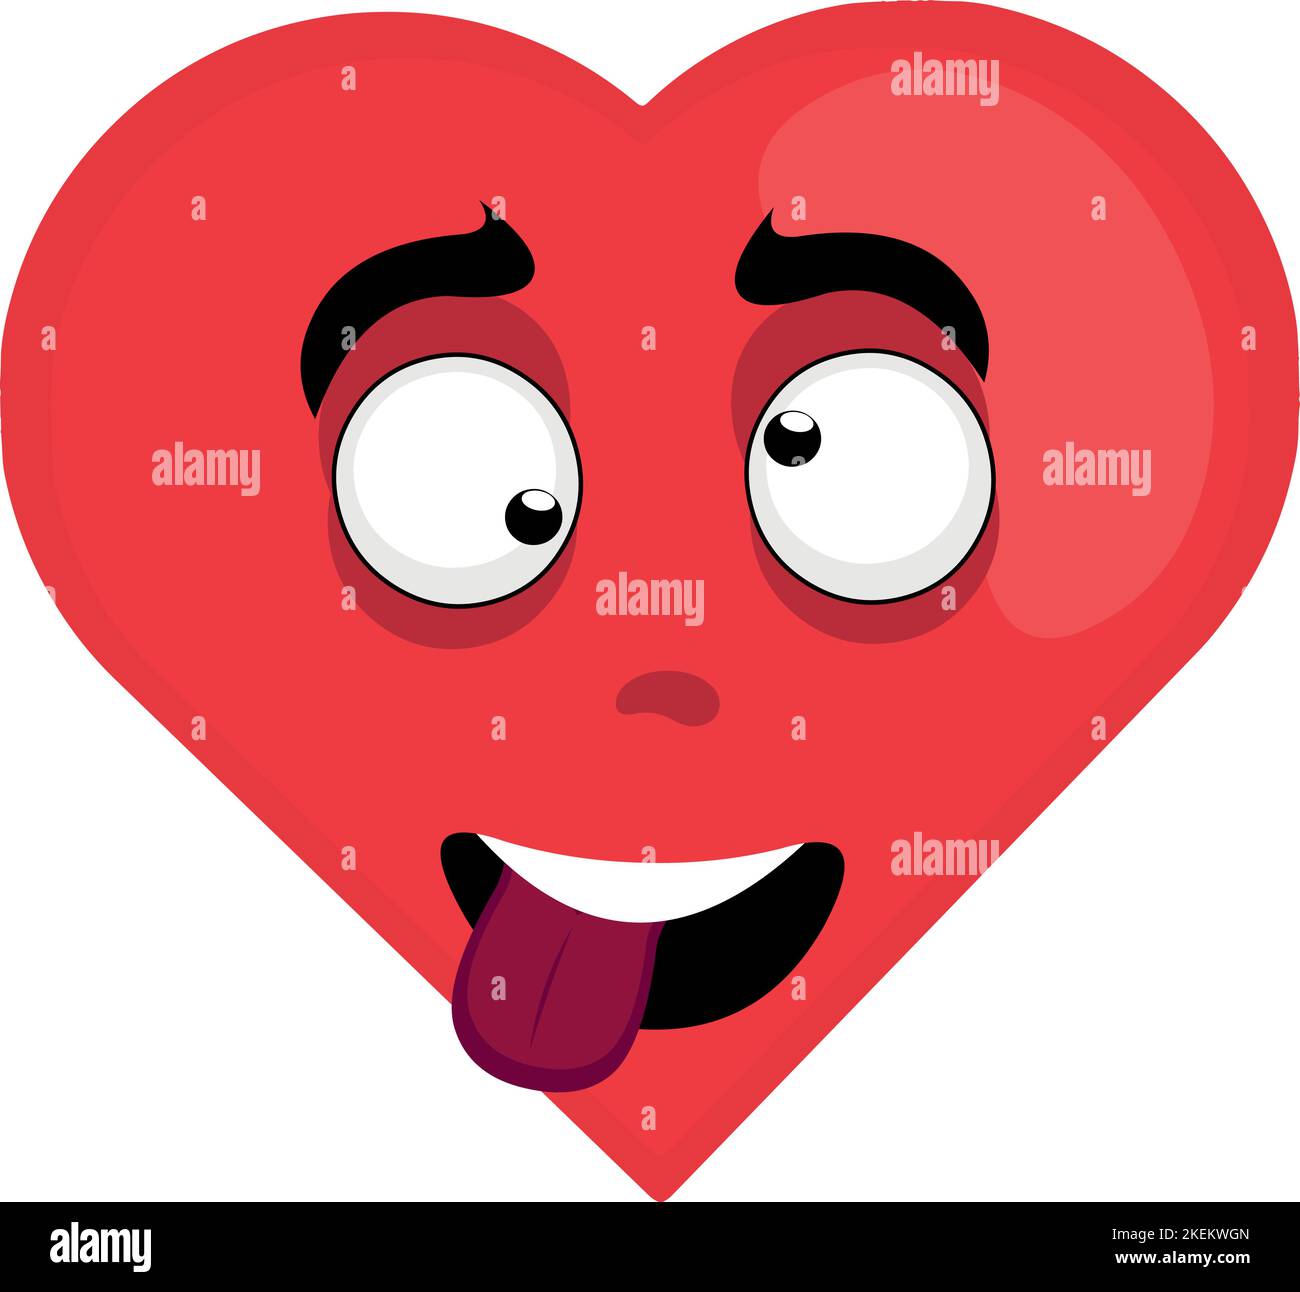 vector character illustration of a cartoon heart with a crazy expression and tongue out Stock Vector